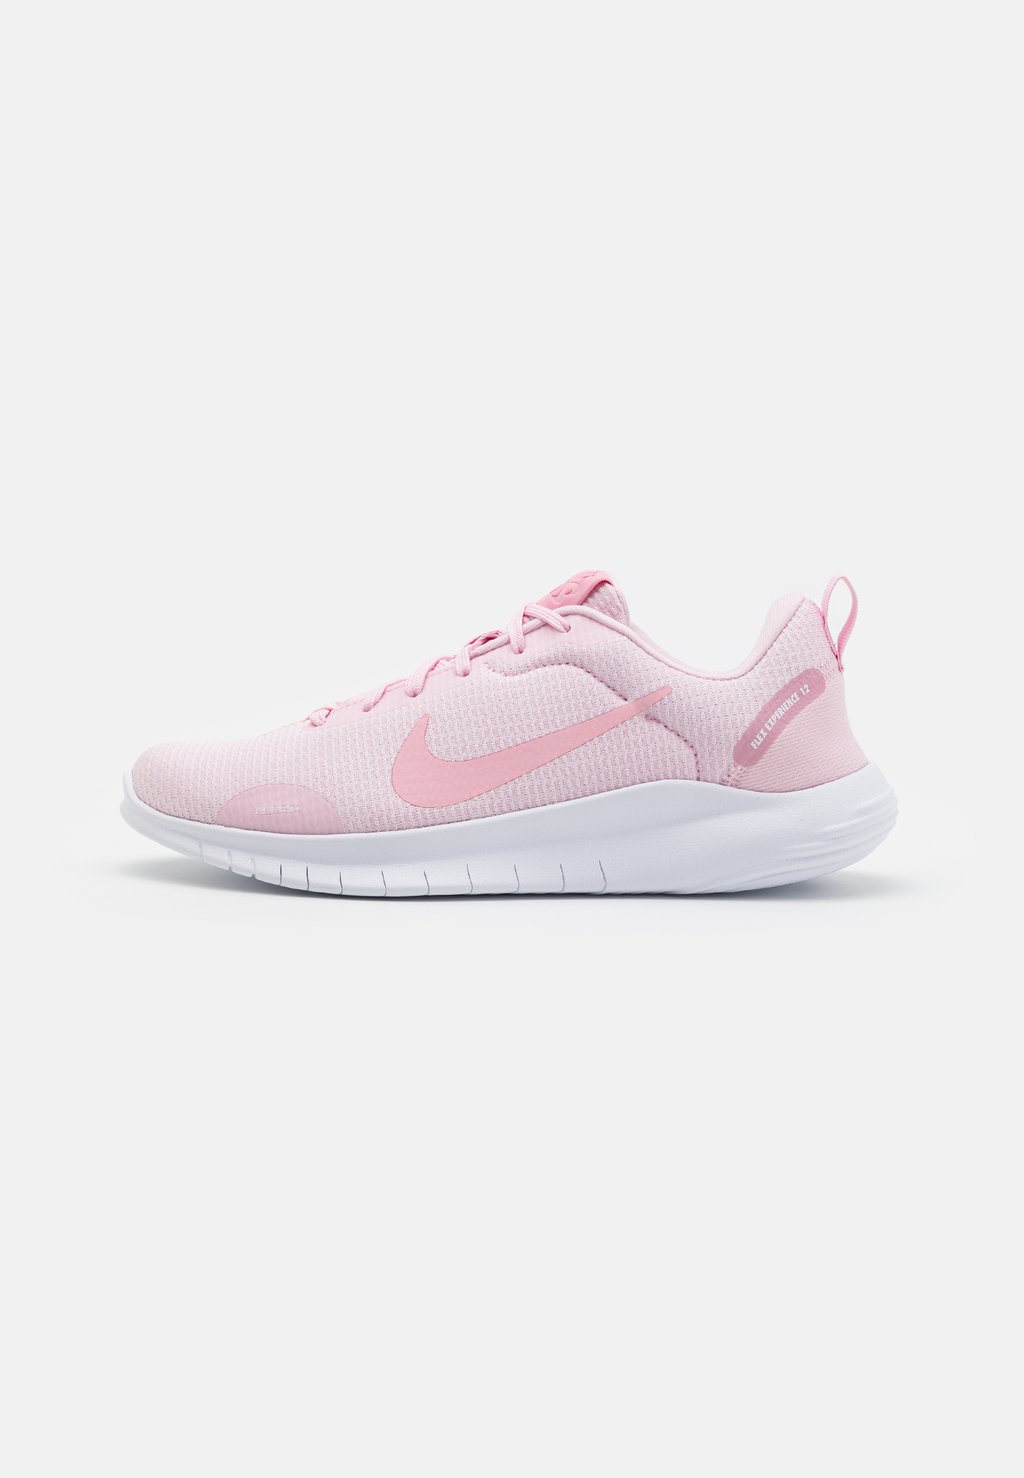 Нейтральные кроссовки FLEX EXPERIENCE RN 12 Nike, цвет pink foam/white/pearl pink/med soft pink 2019 hot sale wholesale button pearl freshwater pearl aaa 8 8 5mm white pink purple button pearl